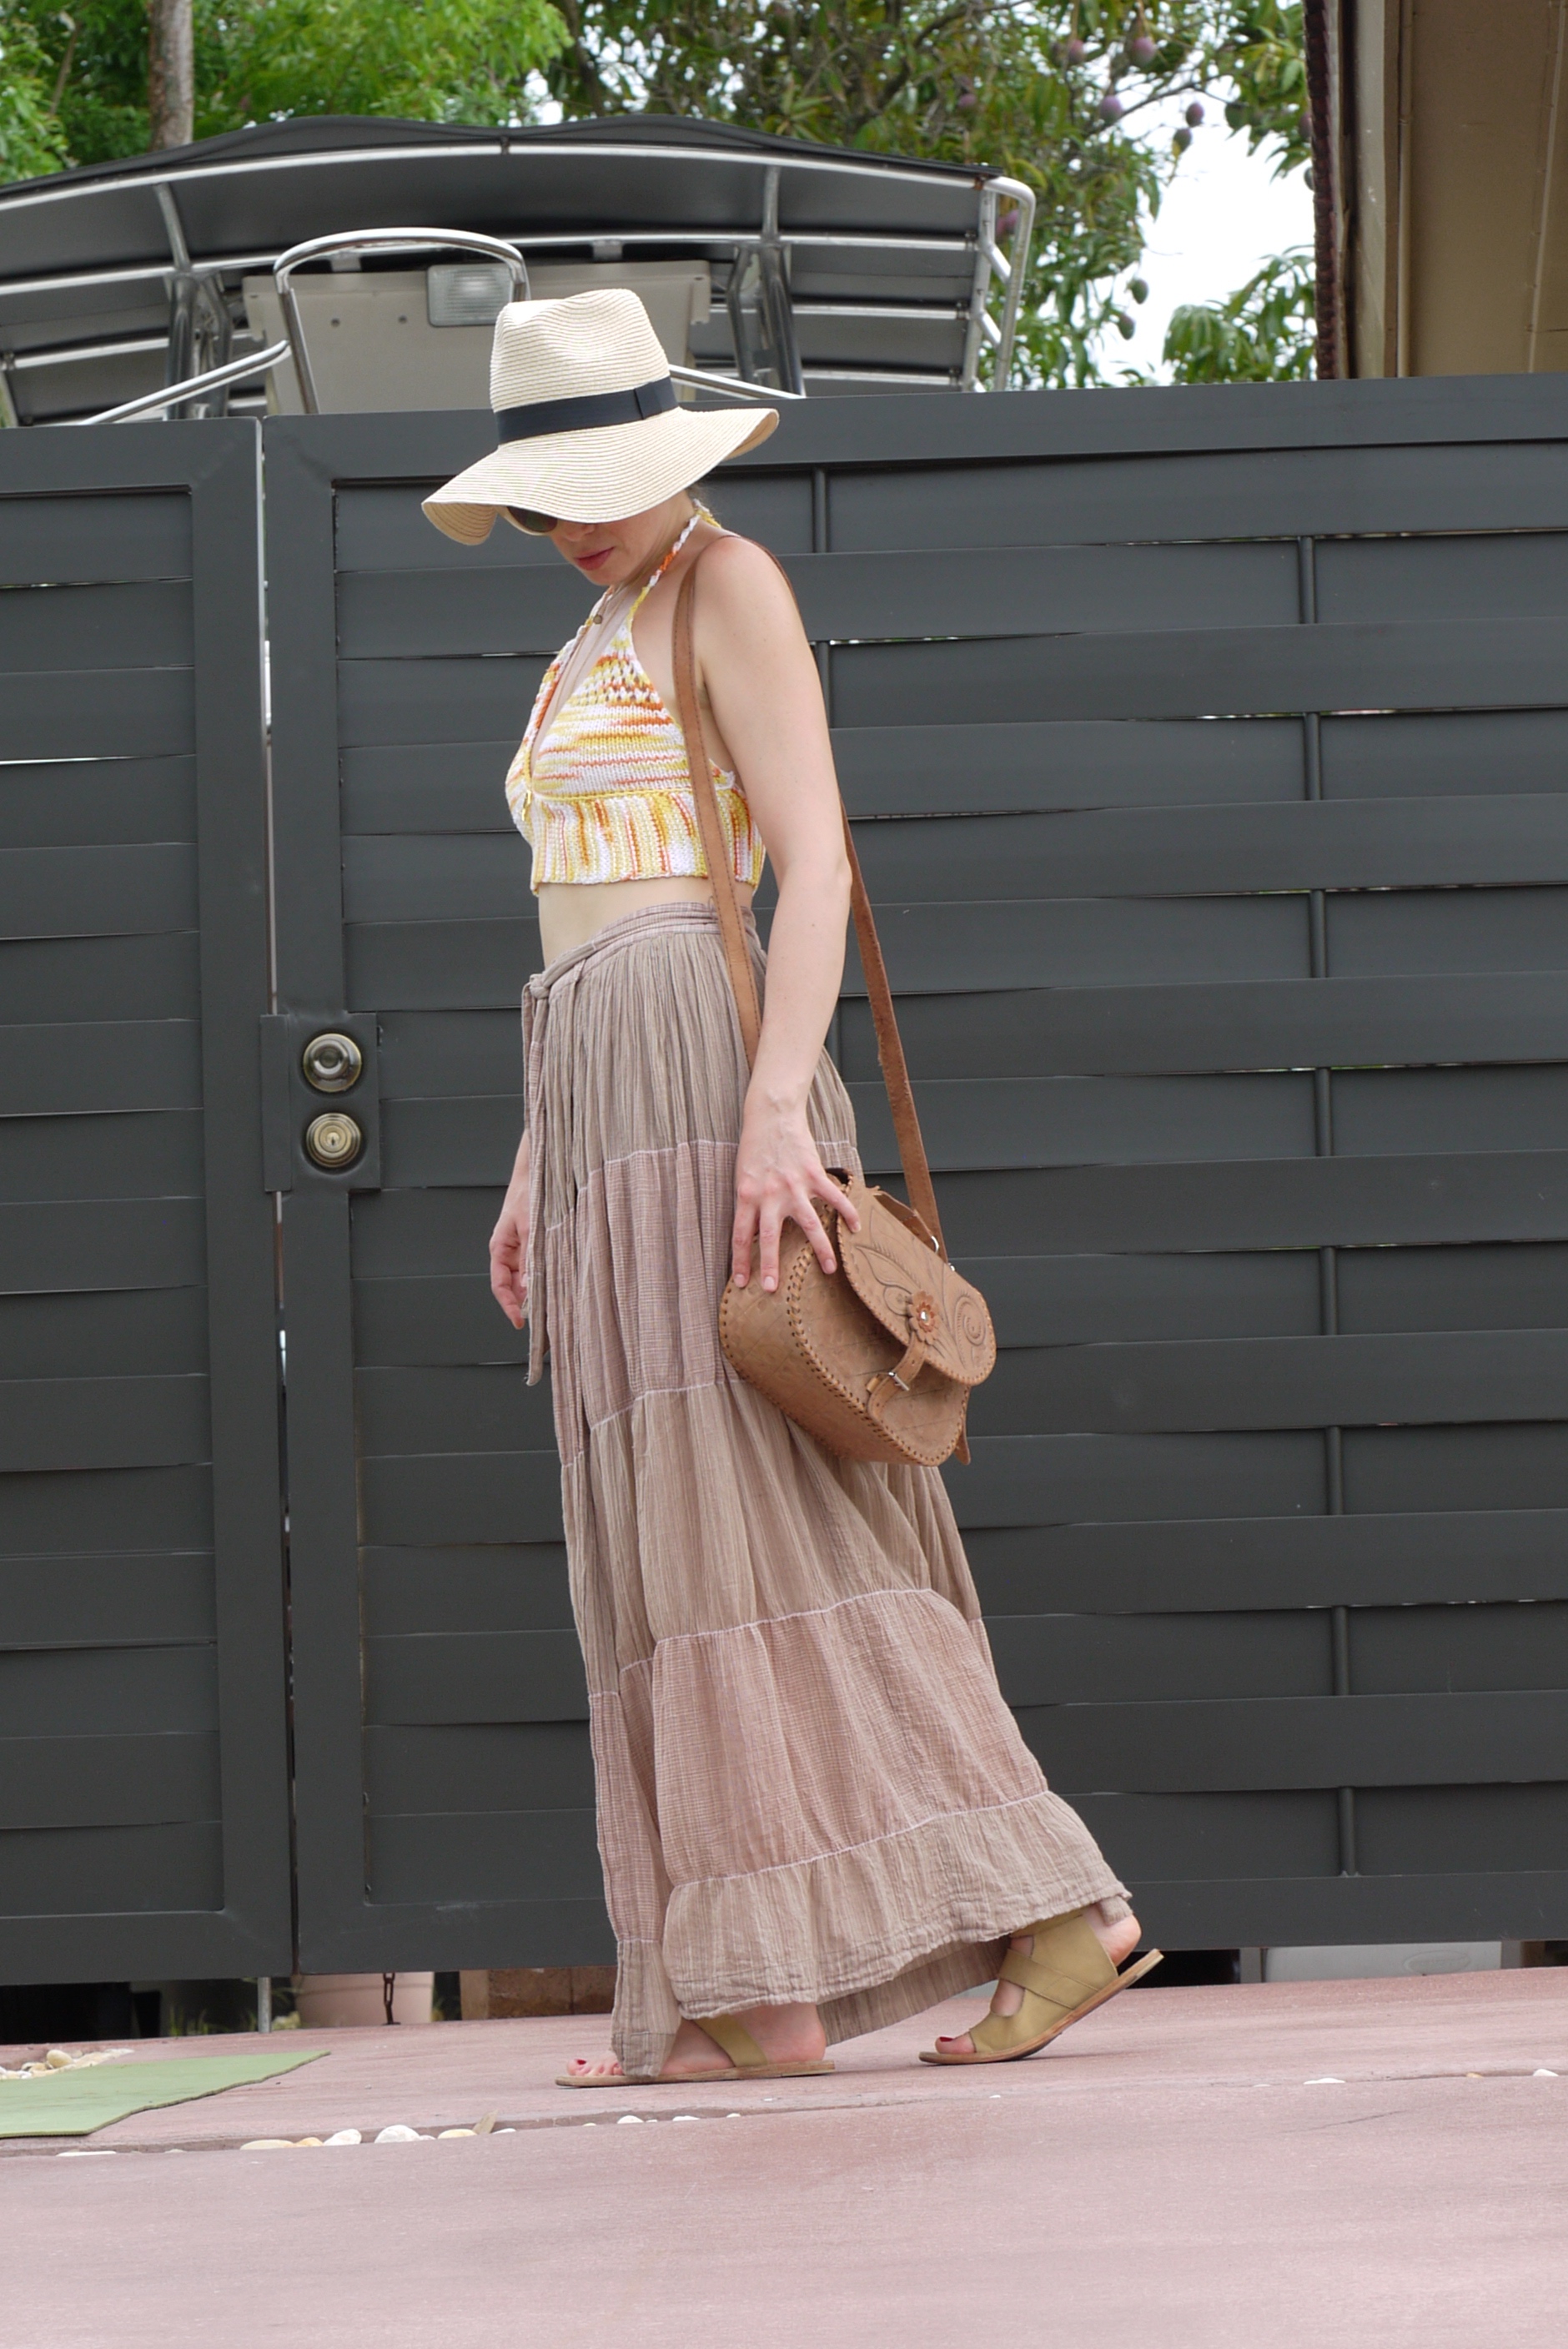 Wrap skirt + knit with gladiator sandals